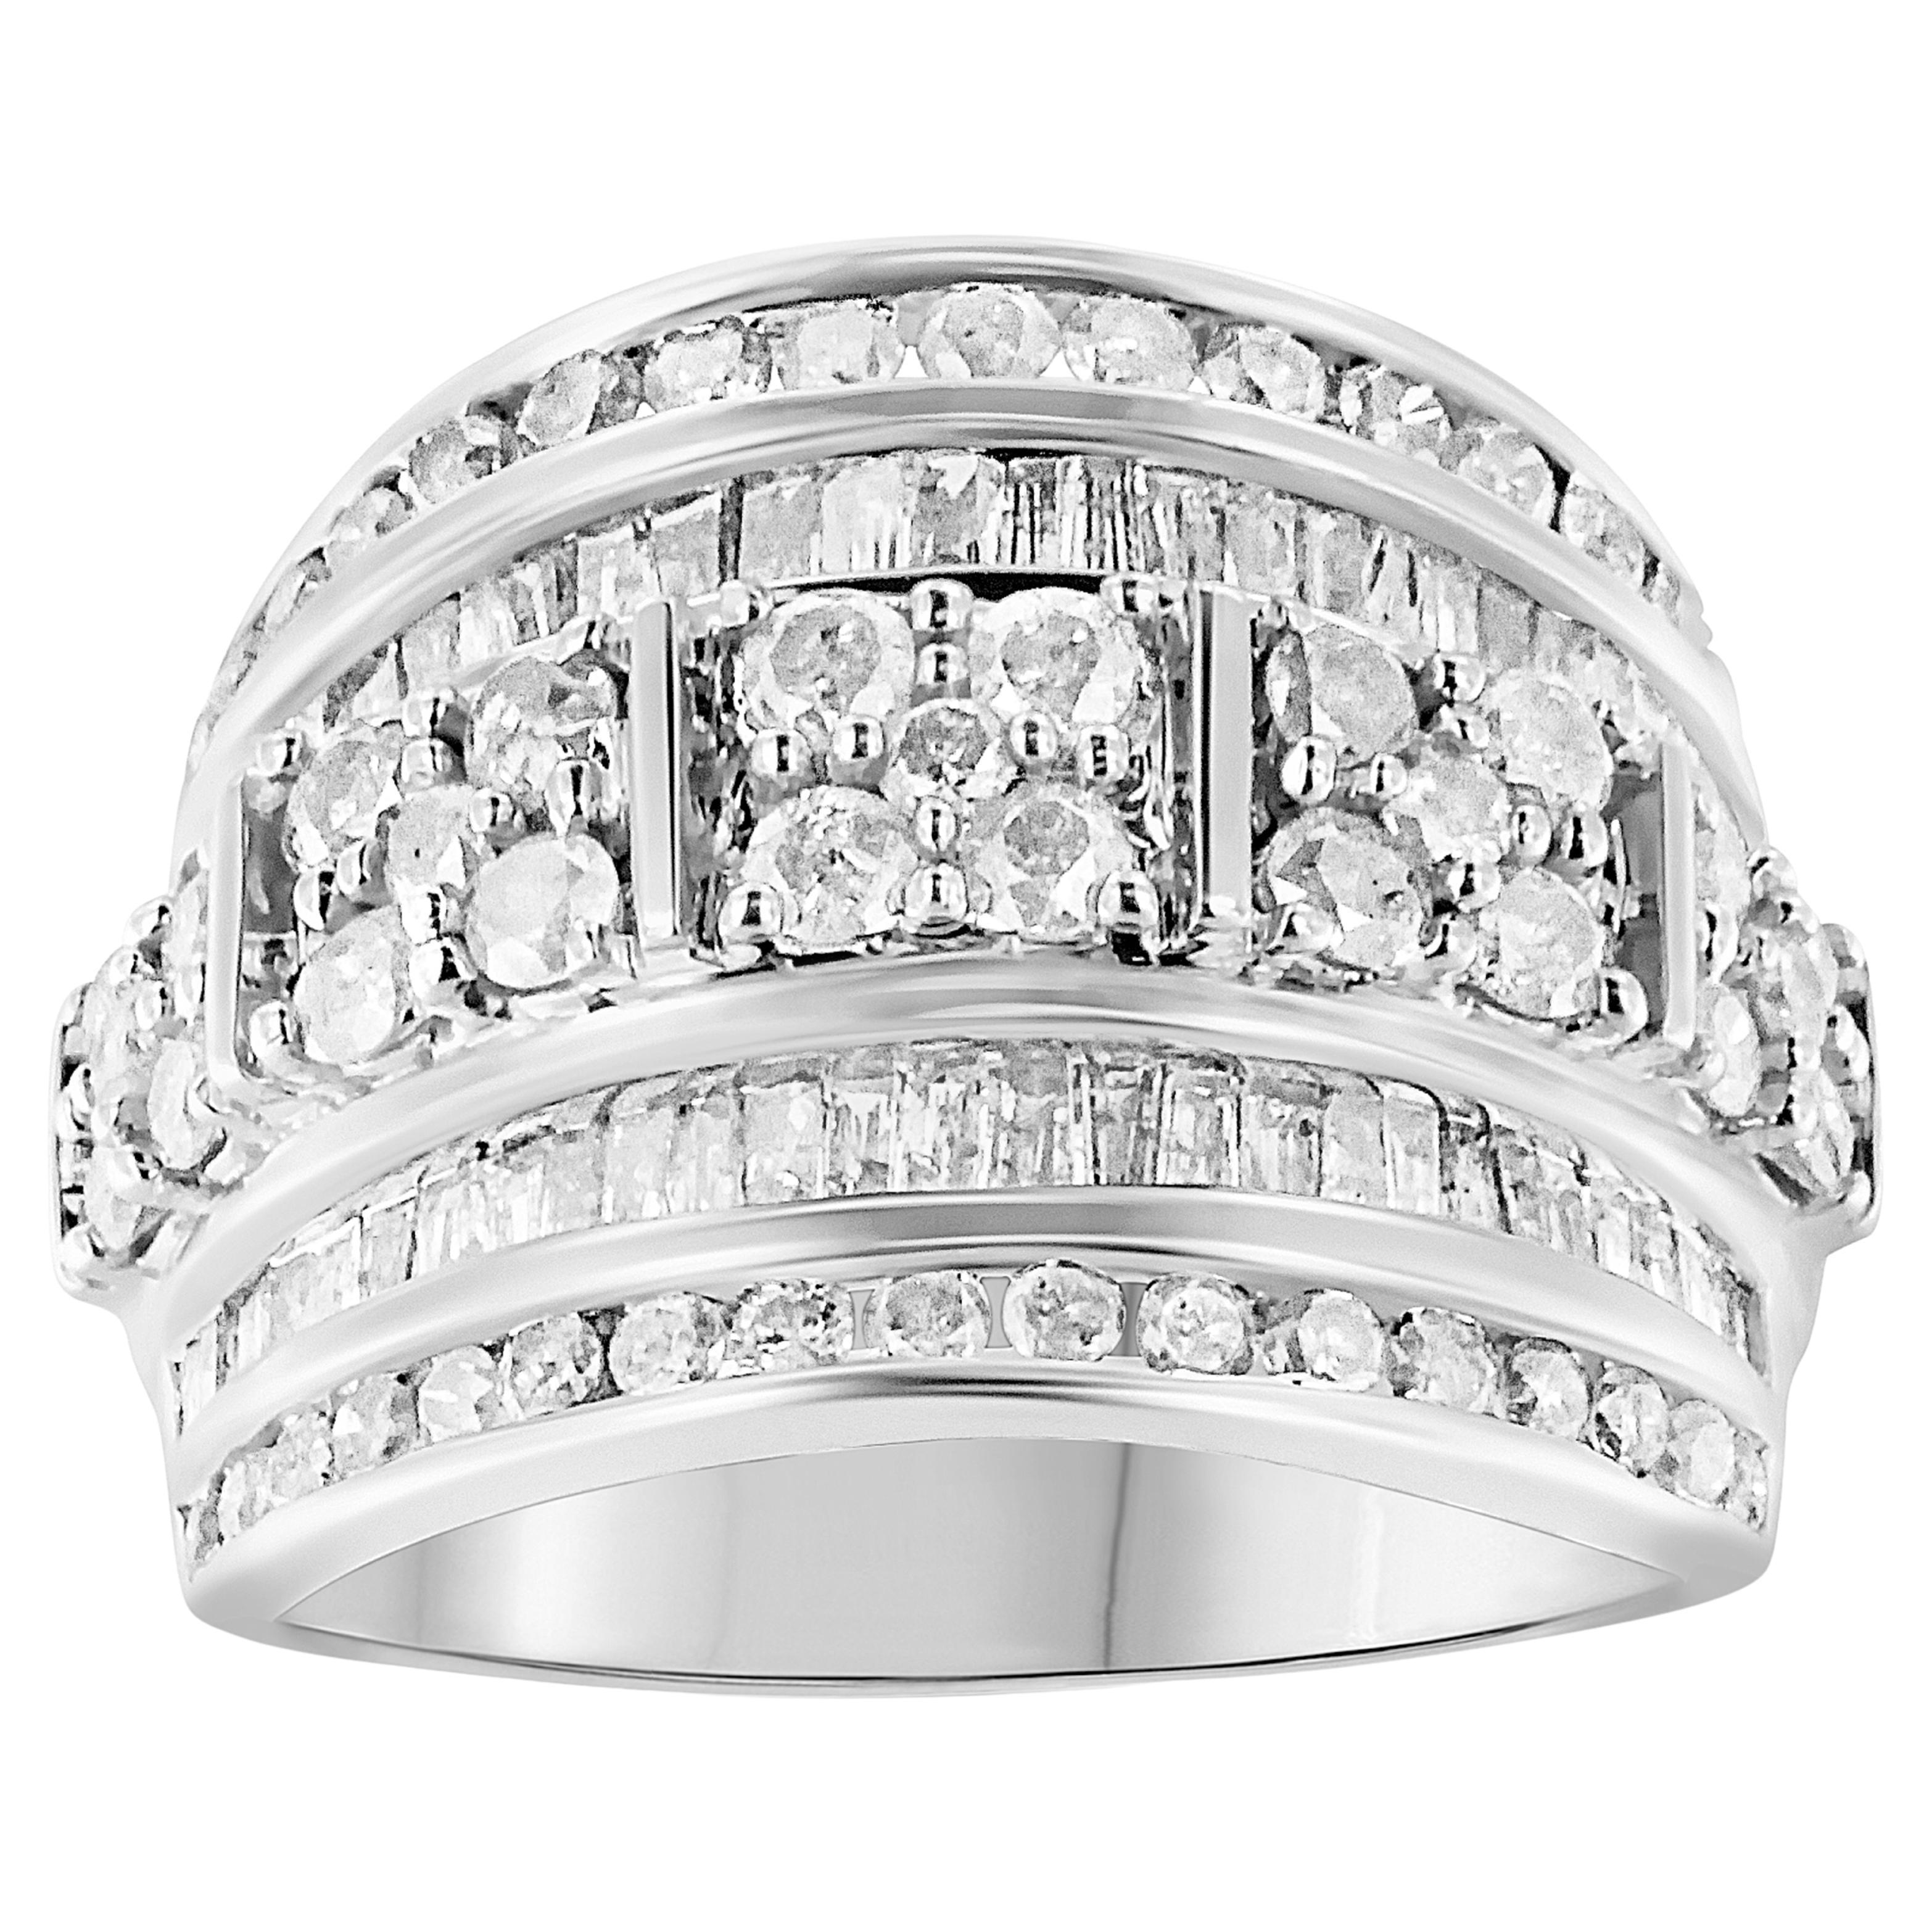 For Sale:  .925 Sterling Silver 2.0 Carat Diamond Multi-Row Tapered Cocktail Fashion Ring